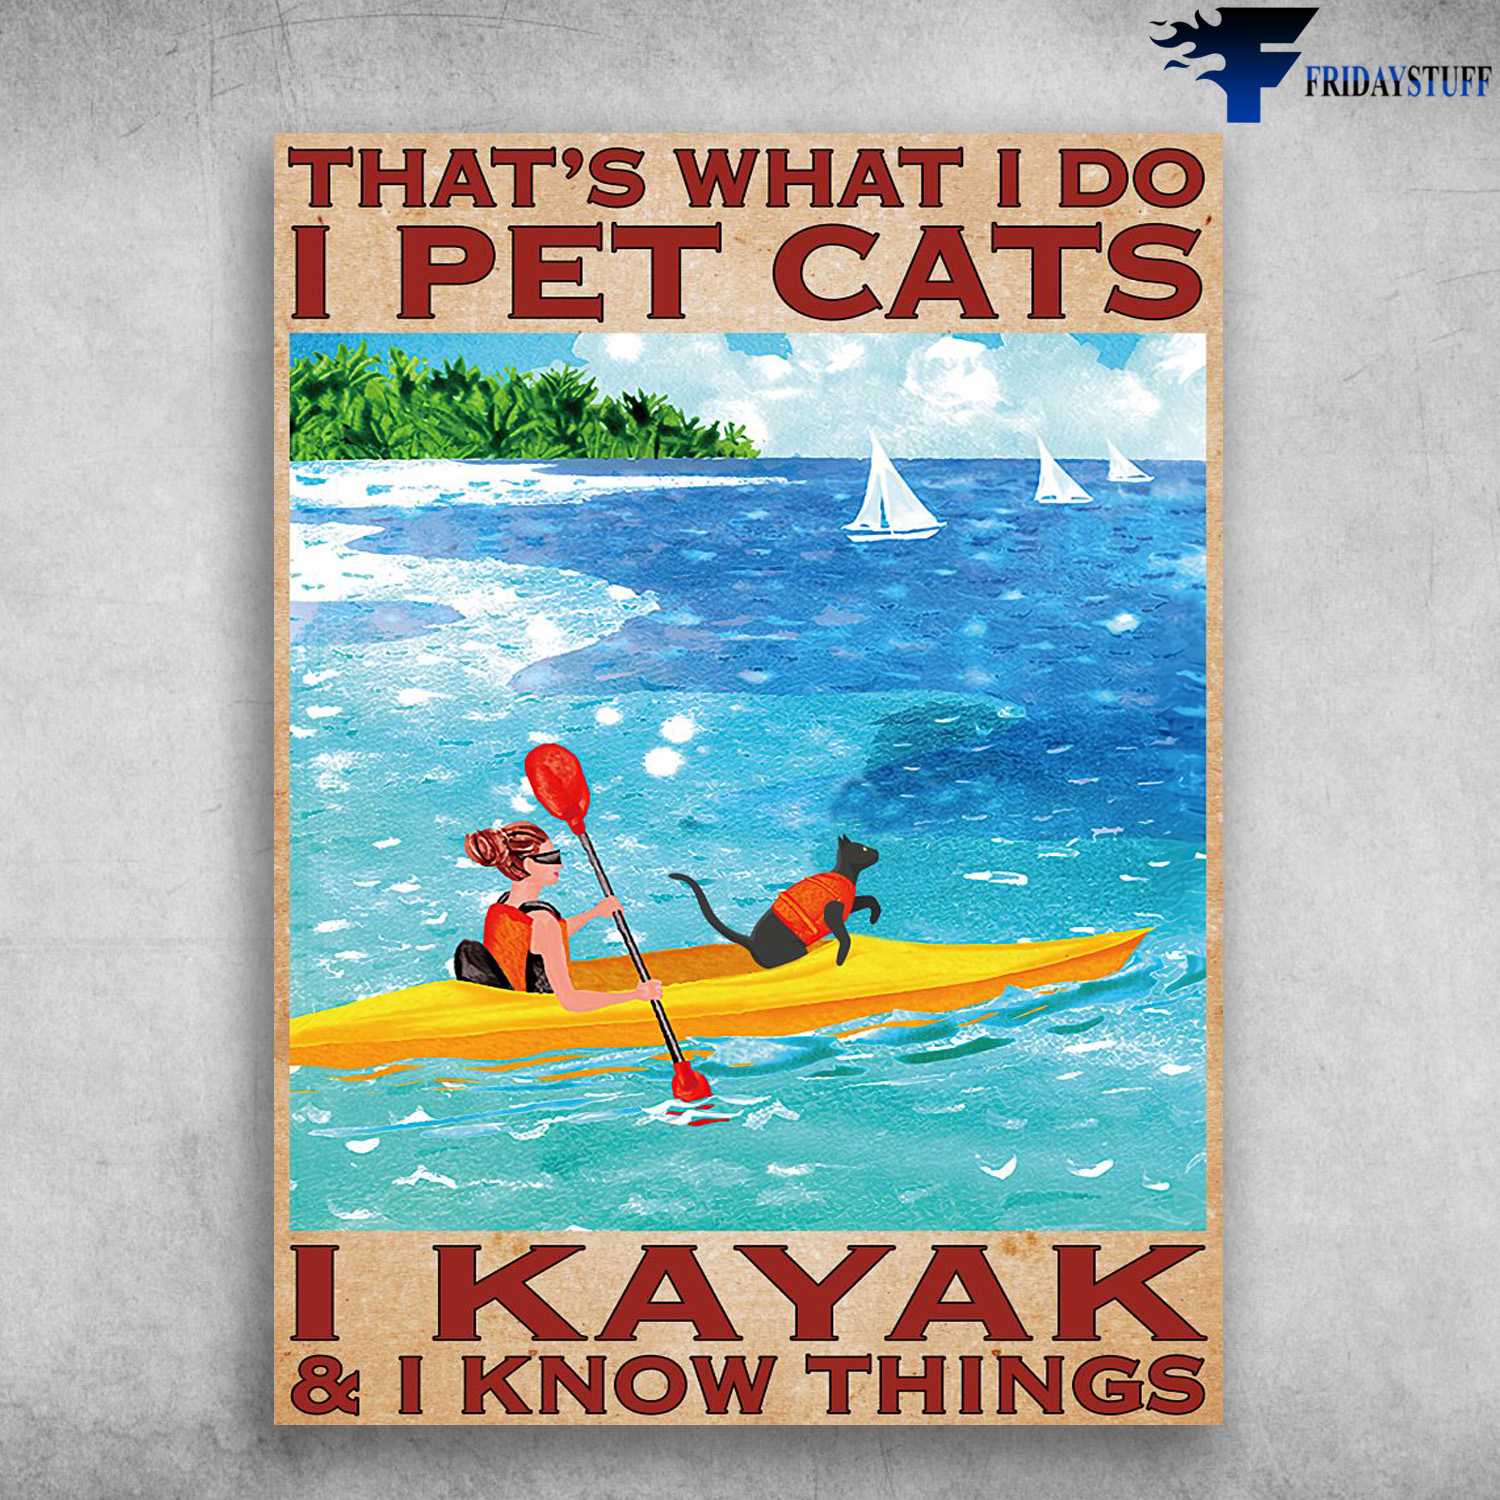 Kayaking With Cat, Kayaking Girl, That's What I Do, I Pet Cats, I Kayak, And I Know Things